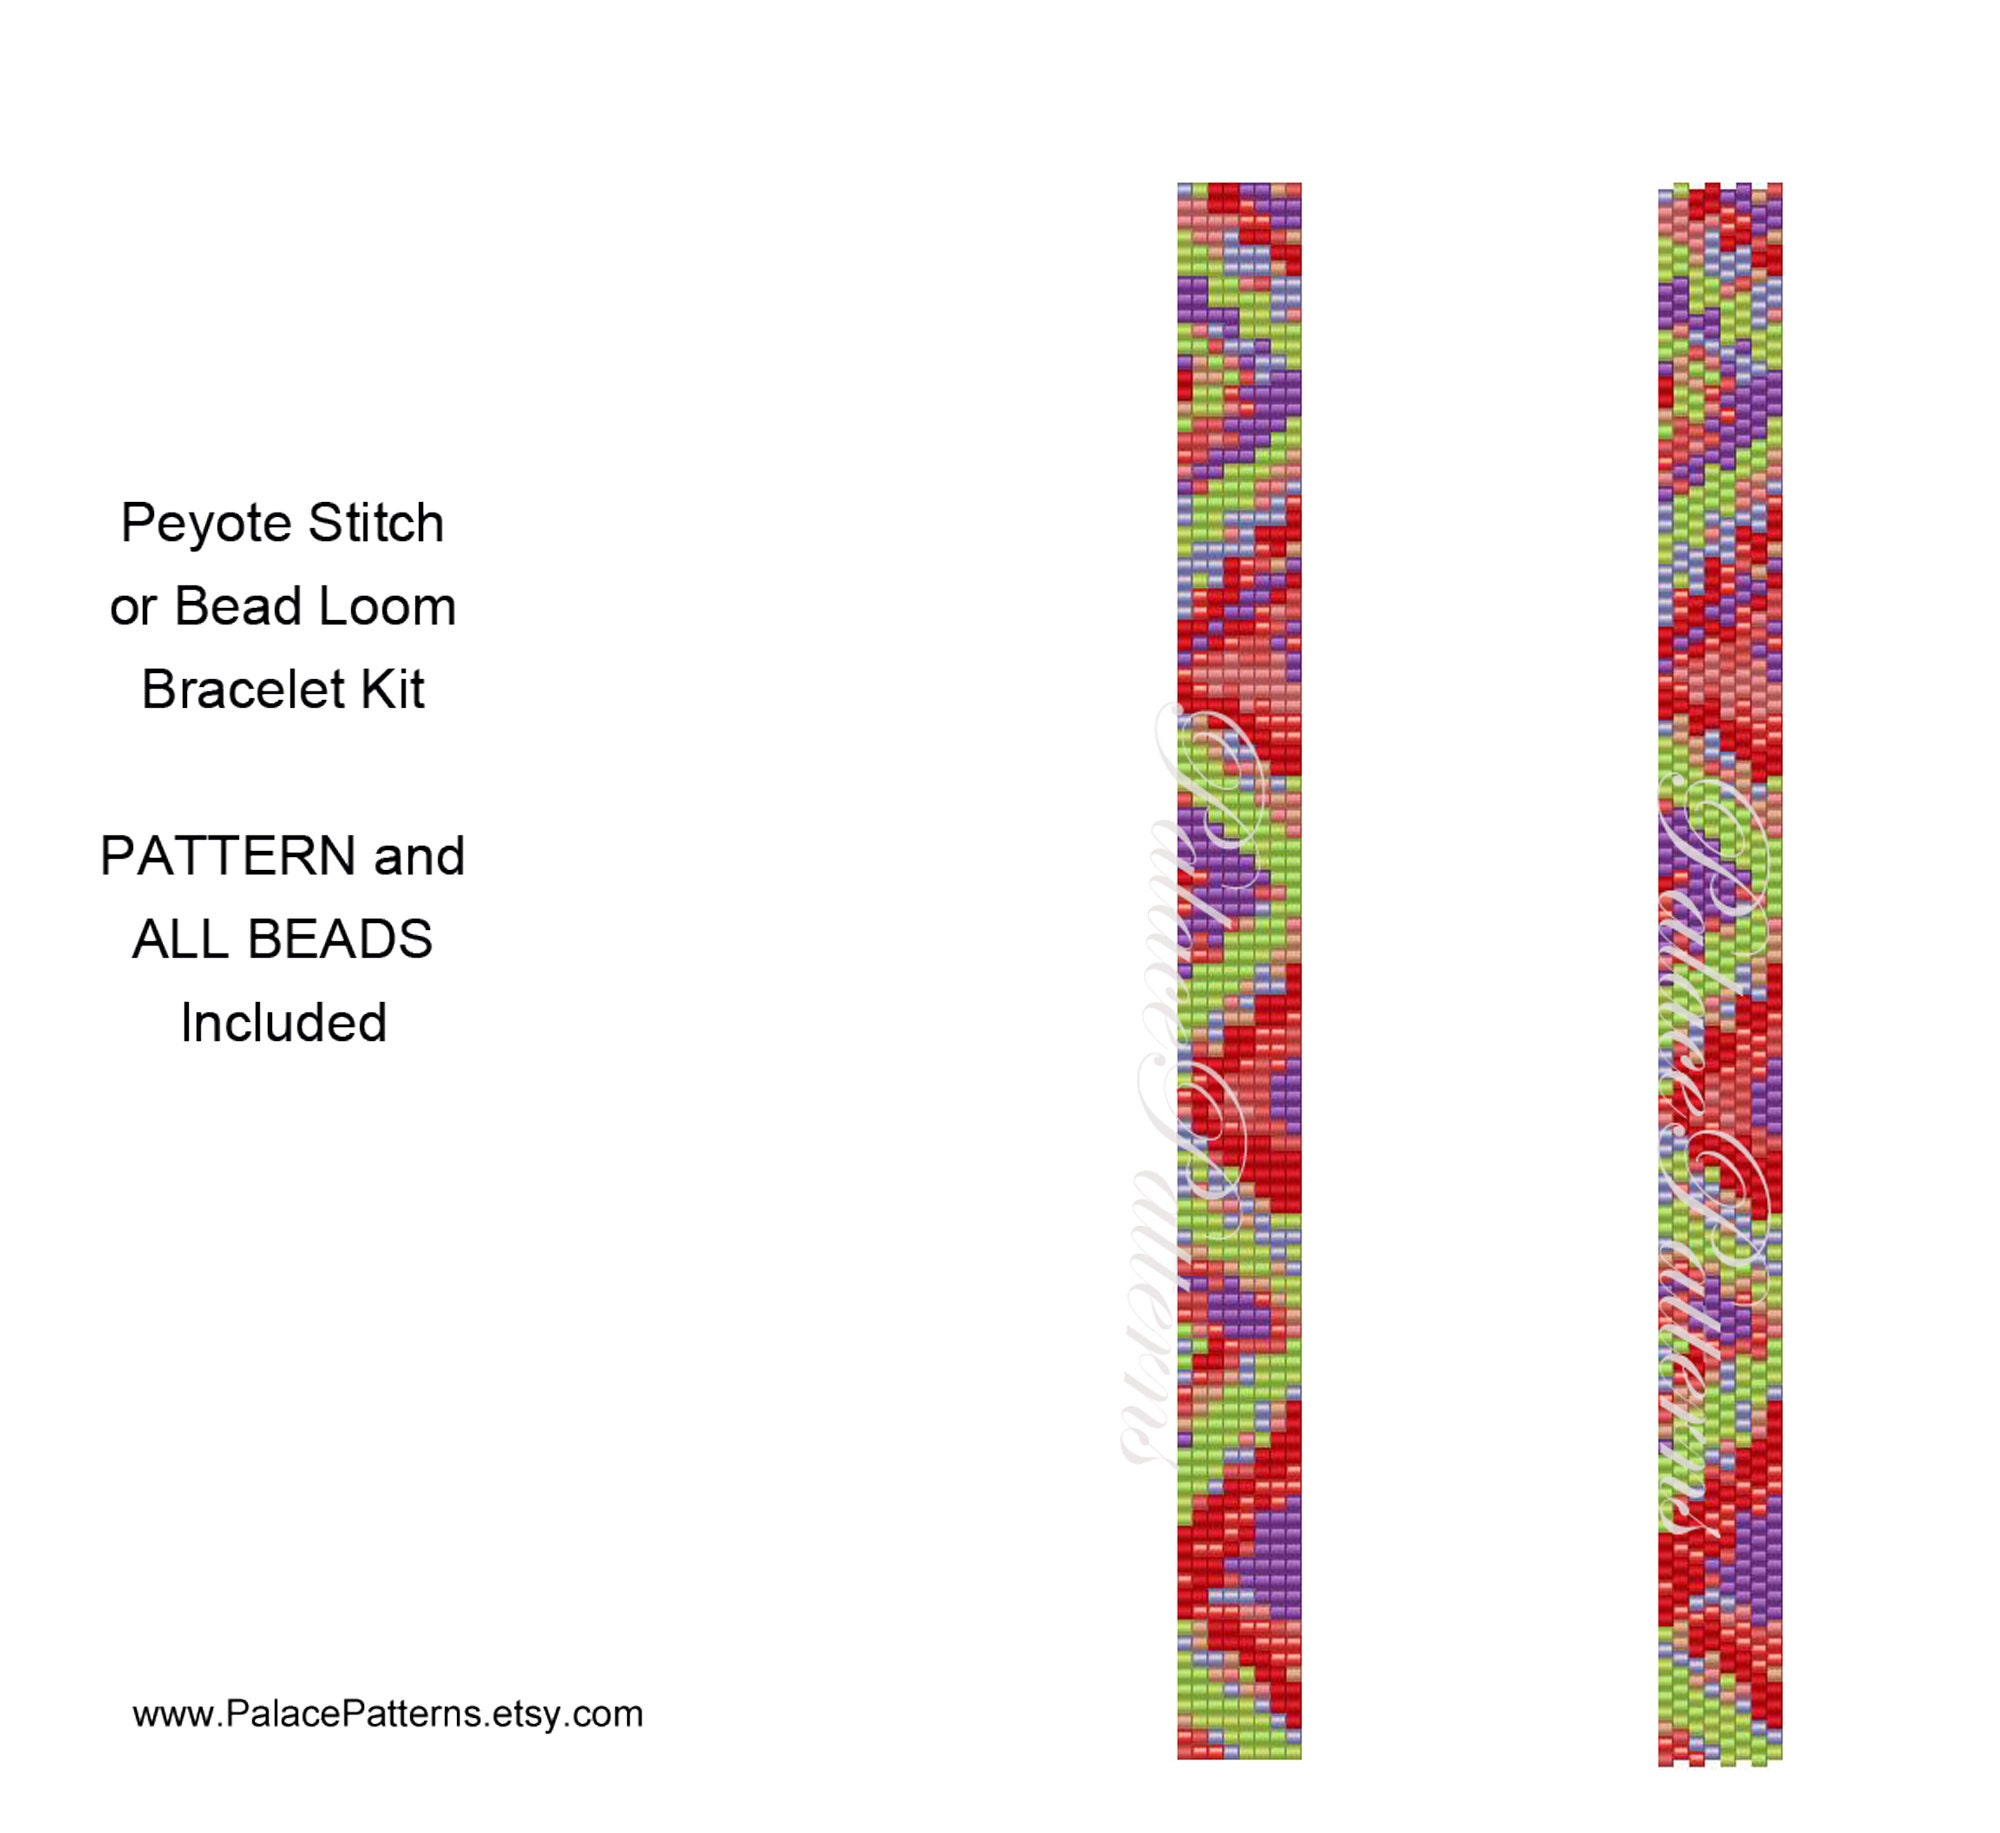 Peyote Stitch or Bead Loom Bracelet KIT - Pink Flower on Yellow Kit -  Delica Bracelet Kit - Pattern and Delica Beads Included. P1